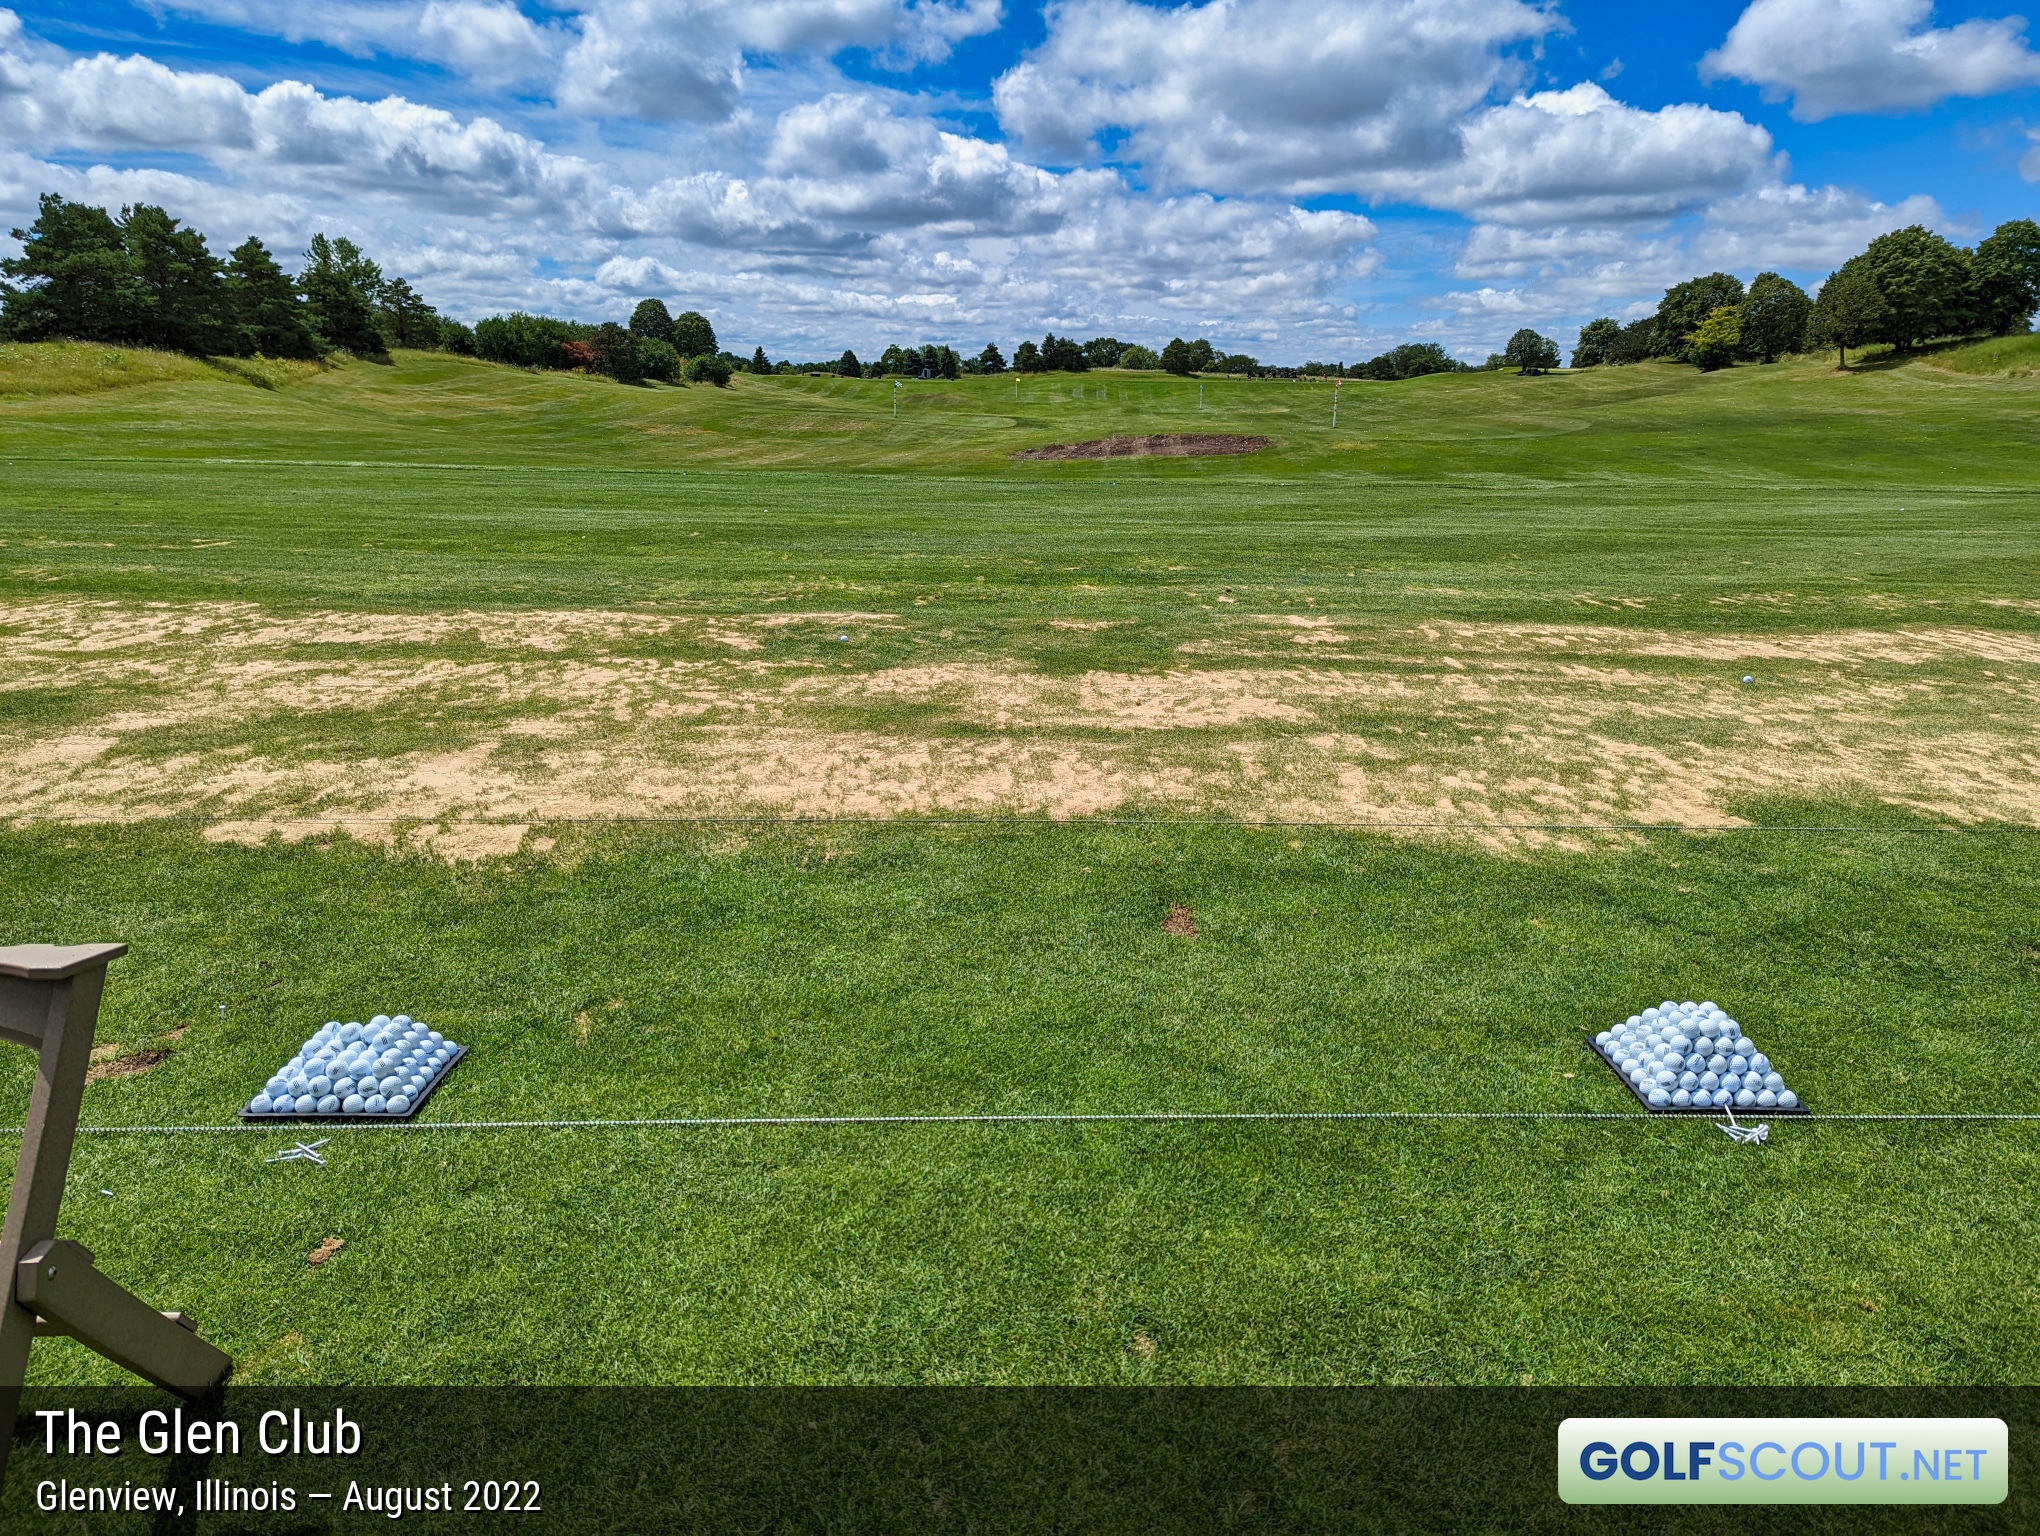 Photo of the practice area at The Glen Club in Glenview, Illinois. 